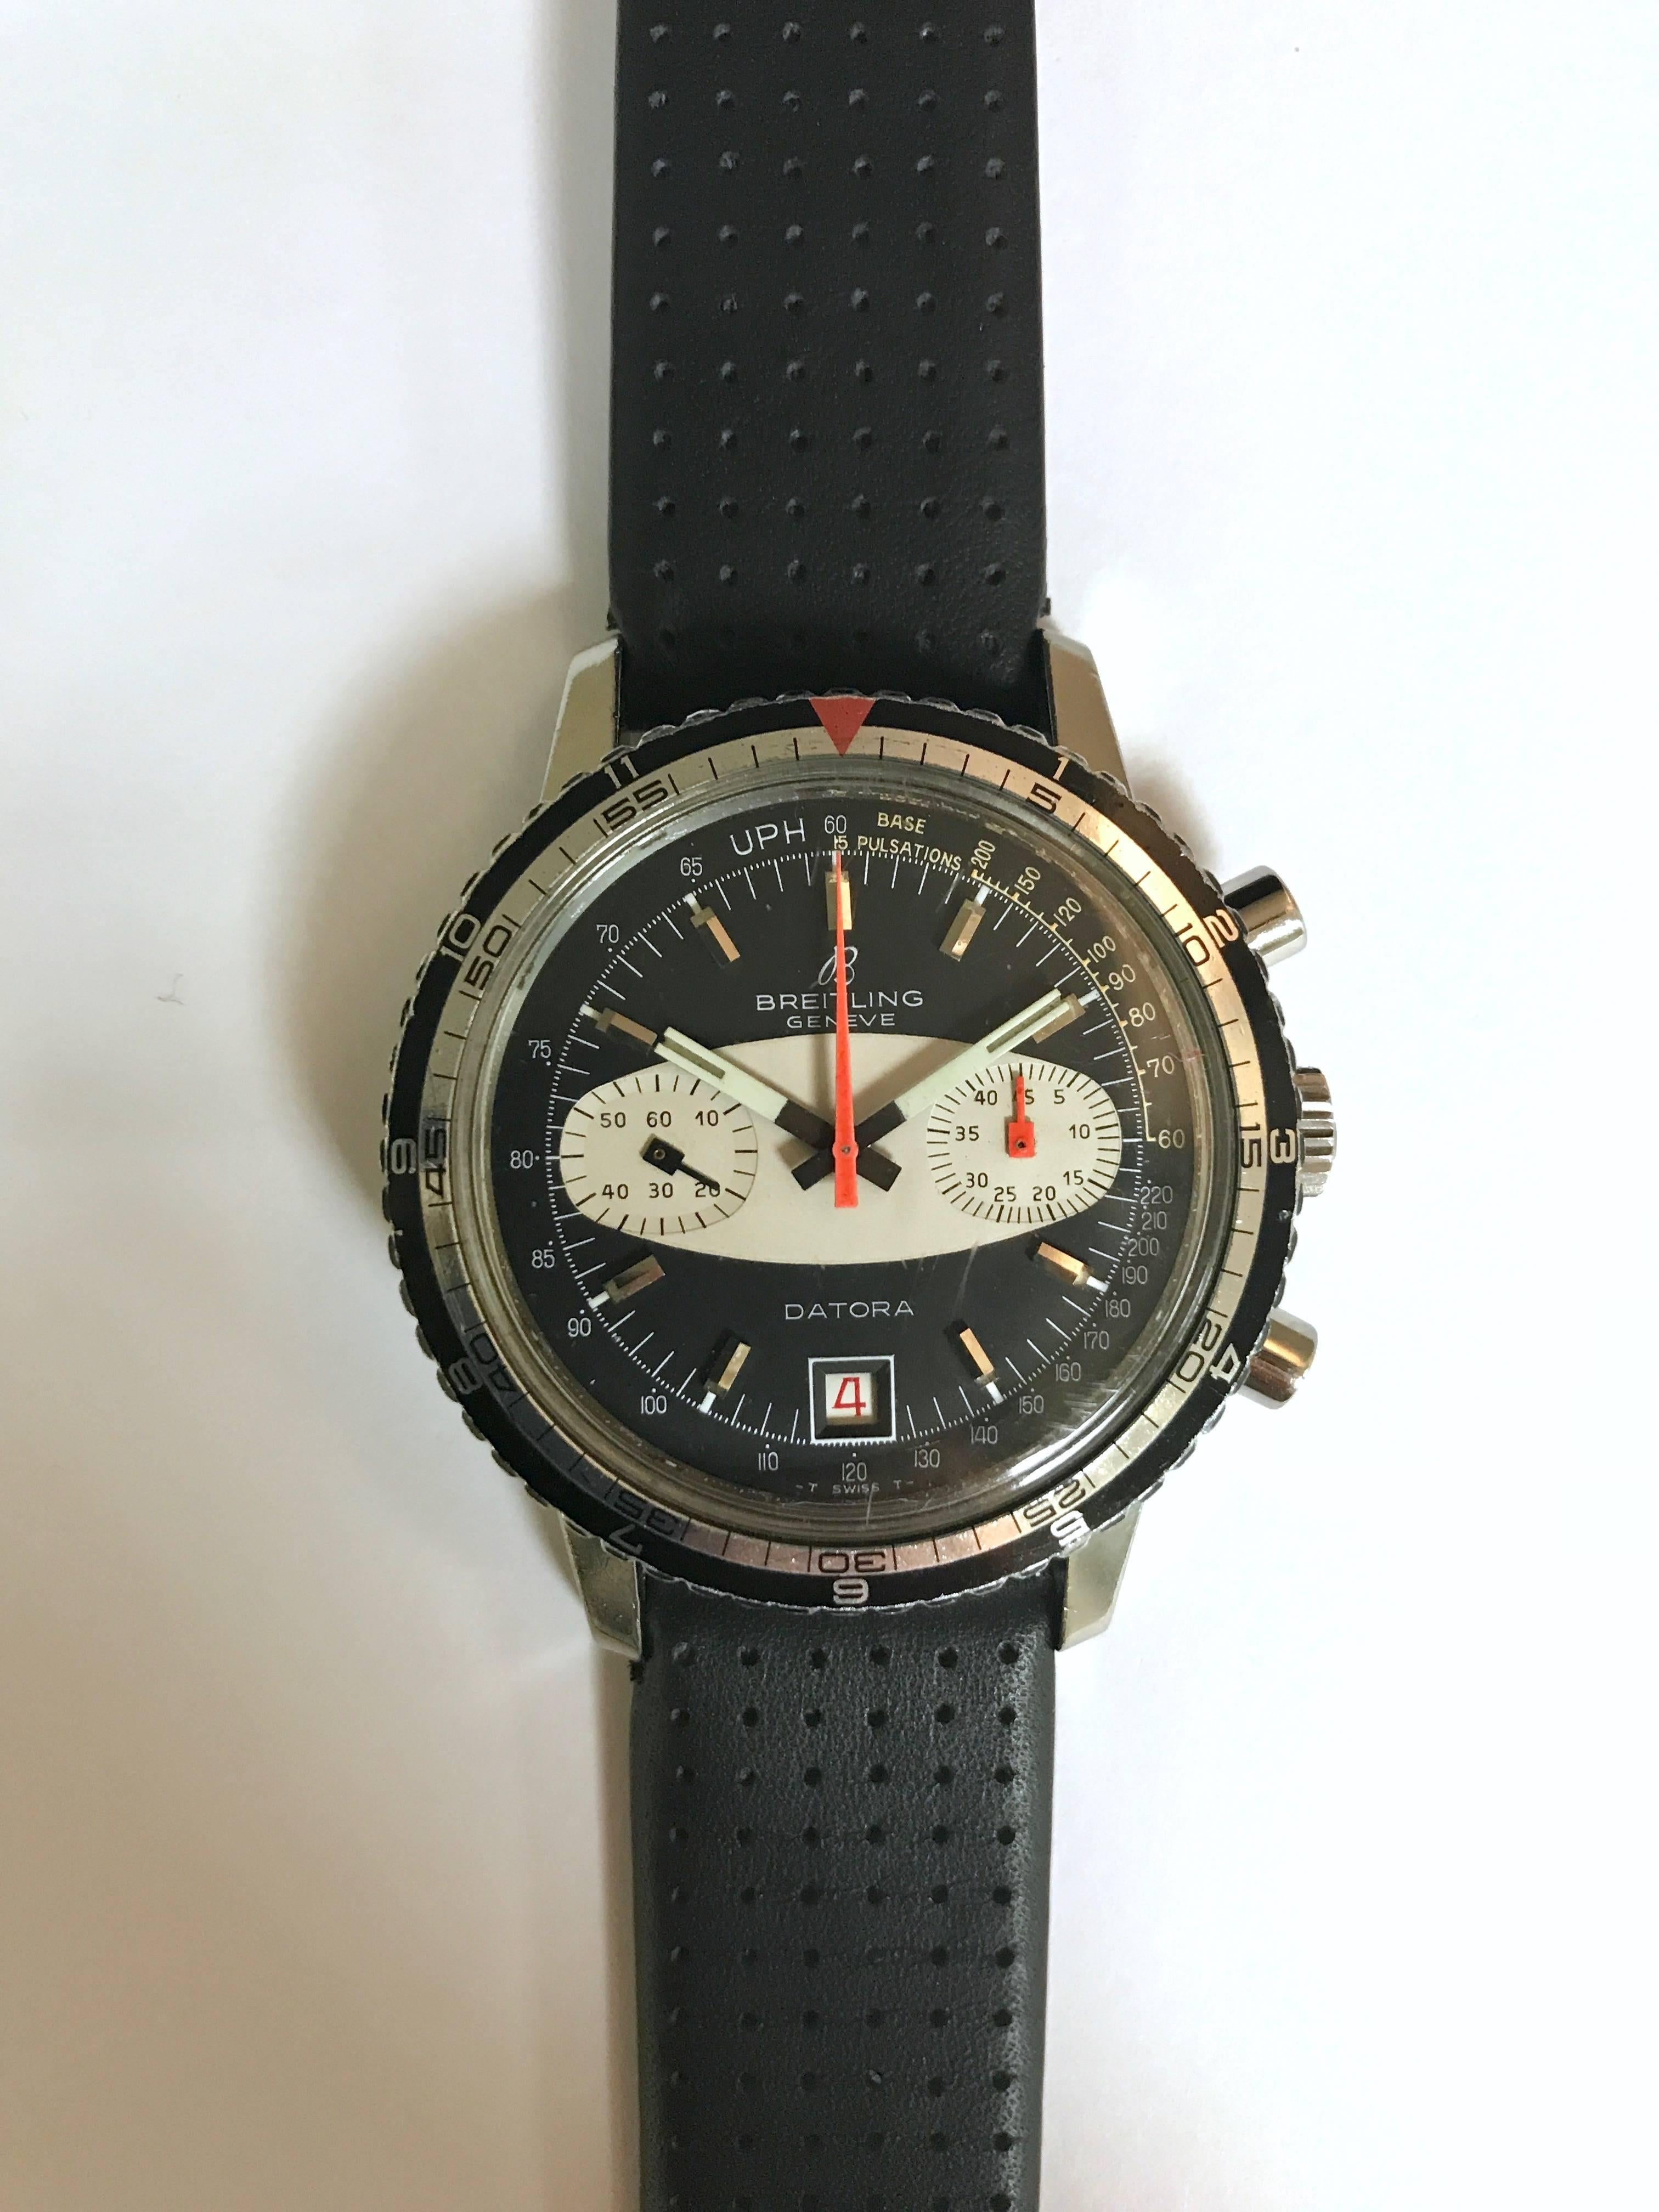 Breitling Datora Circa 1970 Référence 2031
Strap : Leather
Dial : Black and White
